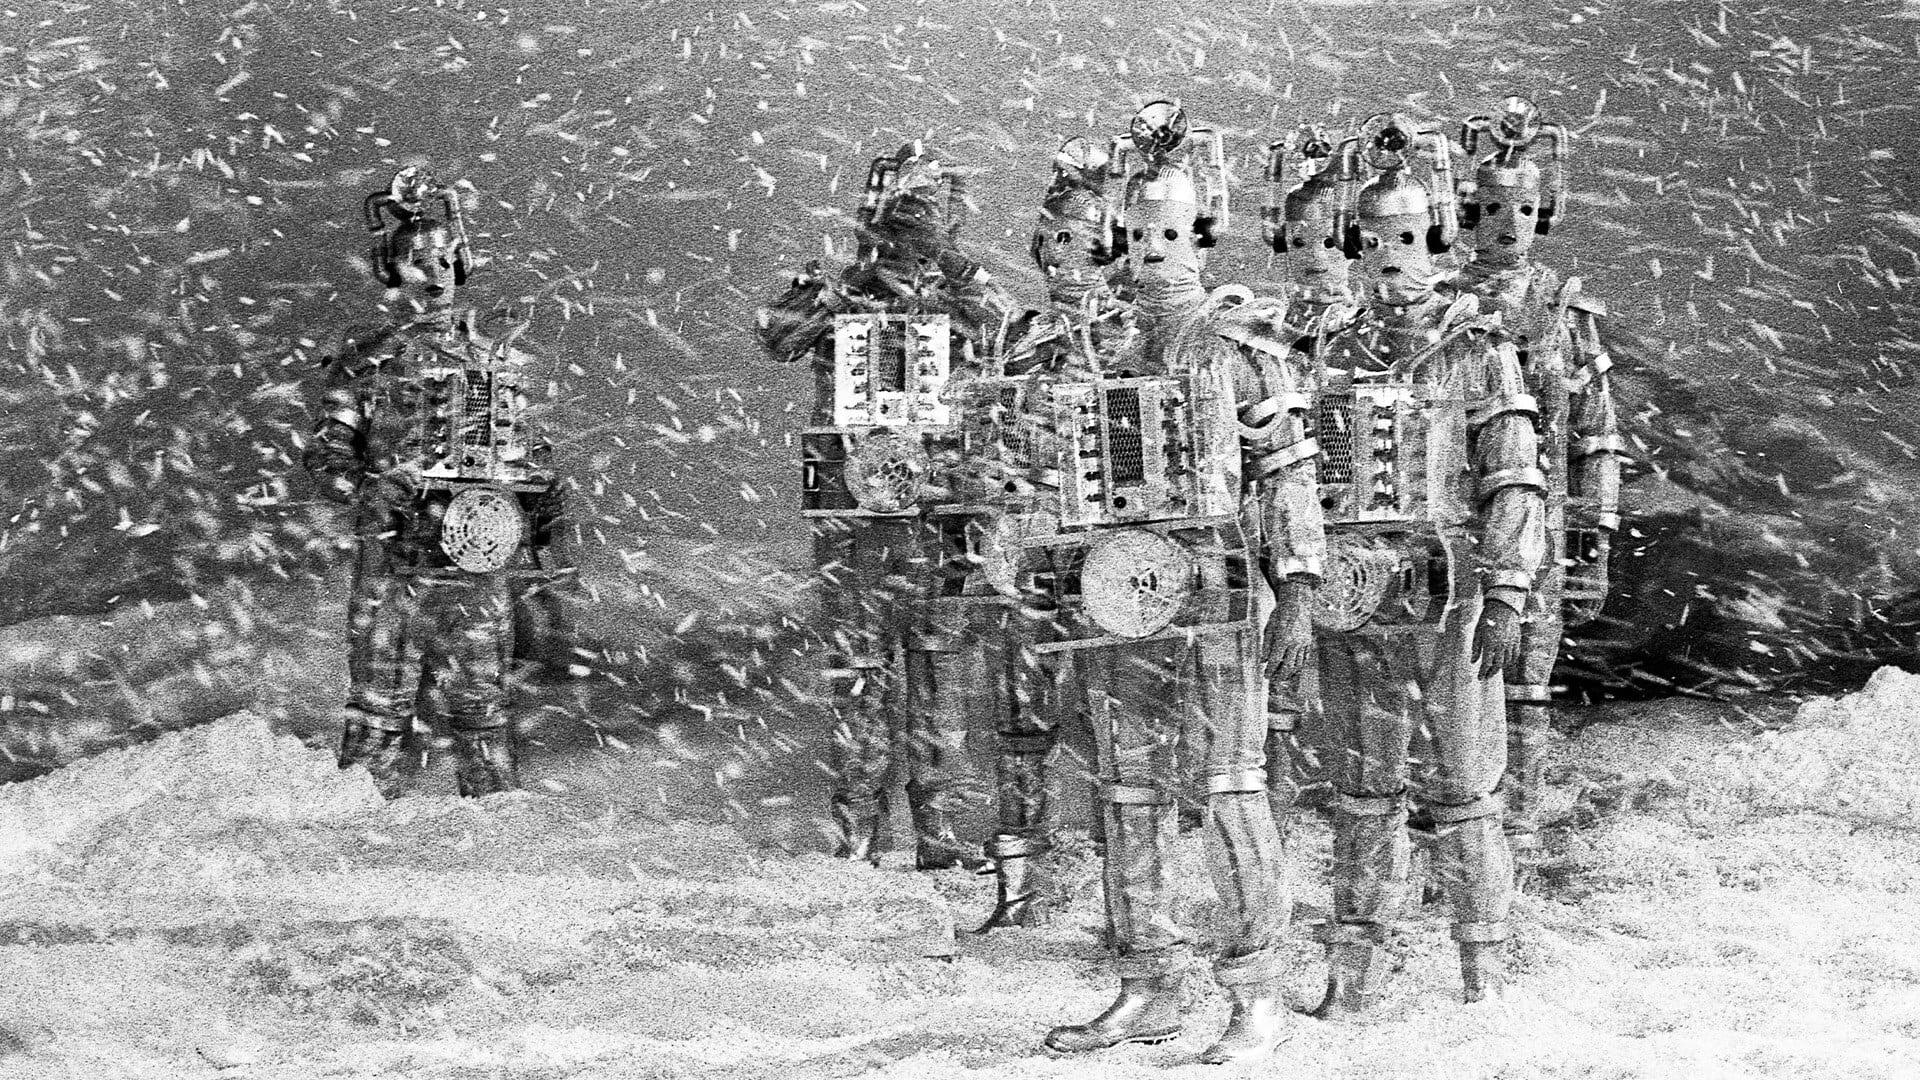 Doctor Who: The Tenth Planet backdrop